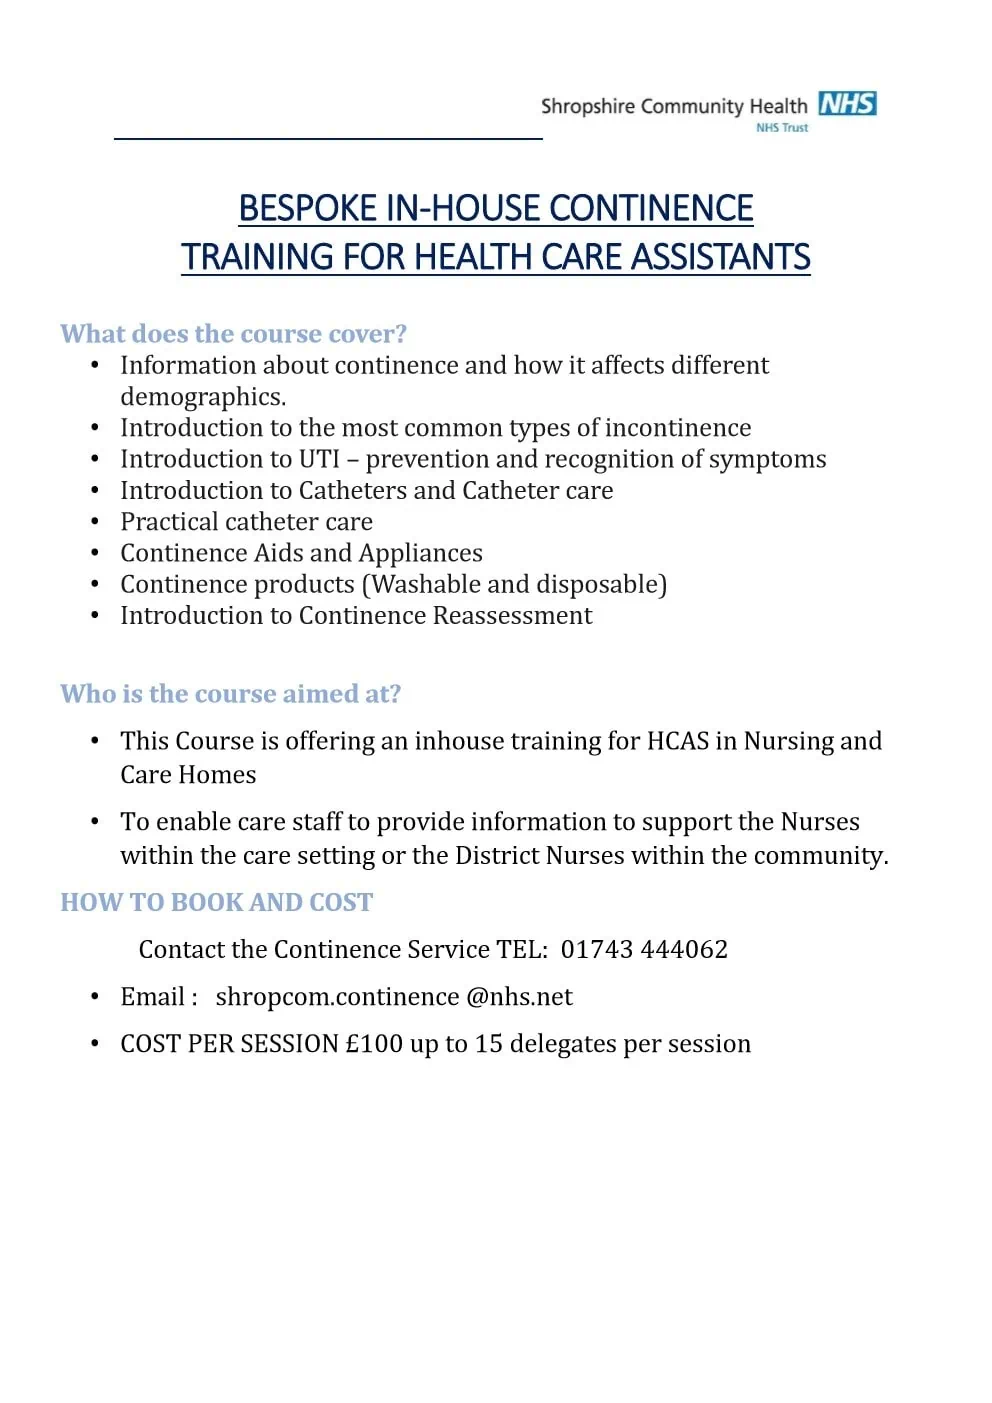 In house continence training for Health Care Assistants 1